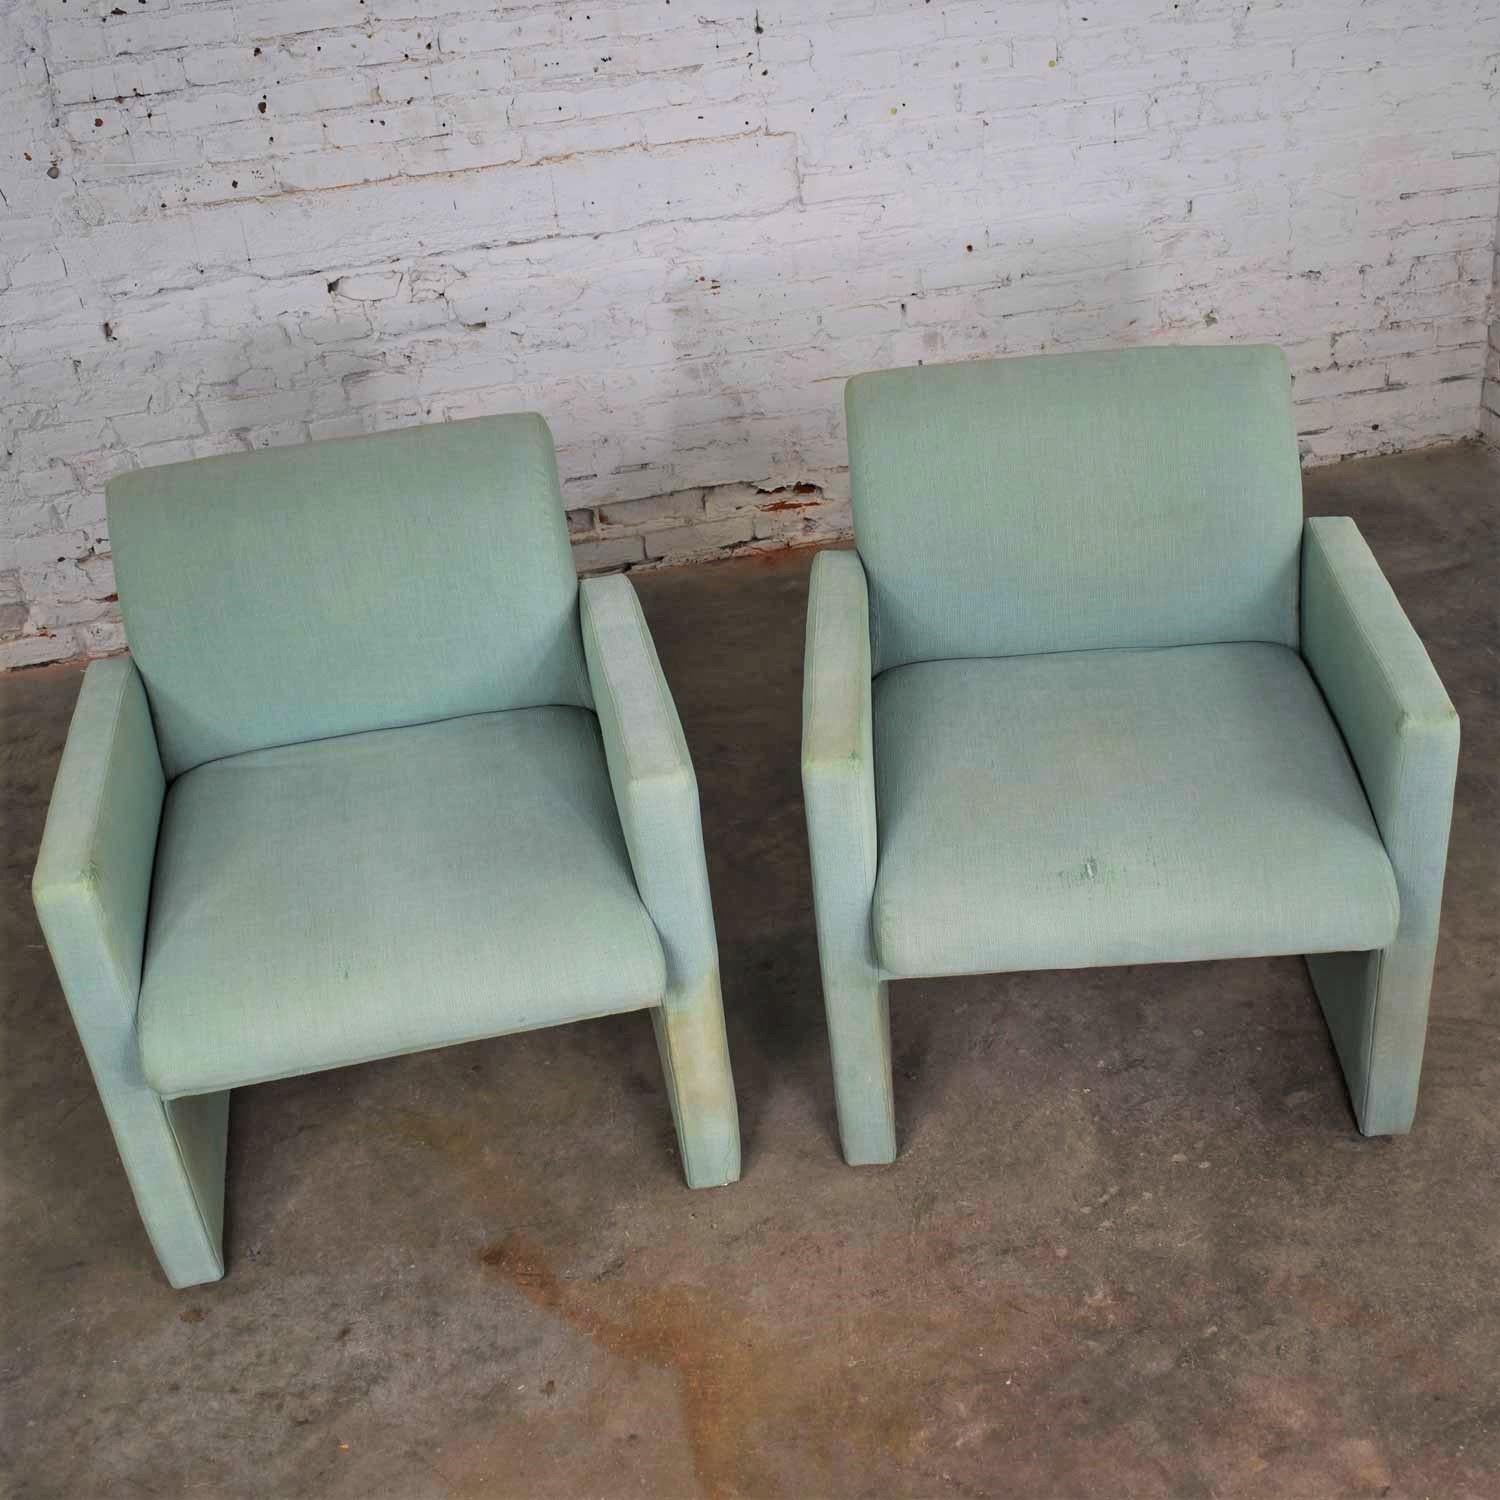 Pair of Petite Modern Accent Chairs in Sea Green 4